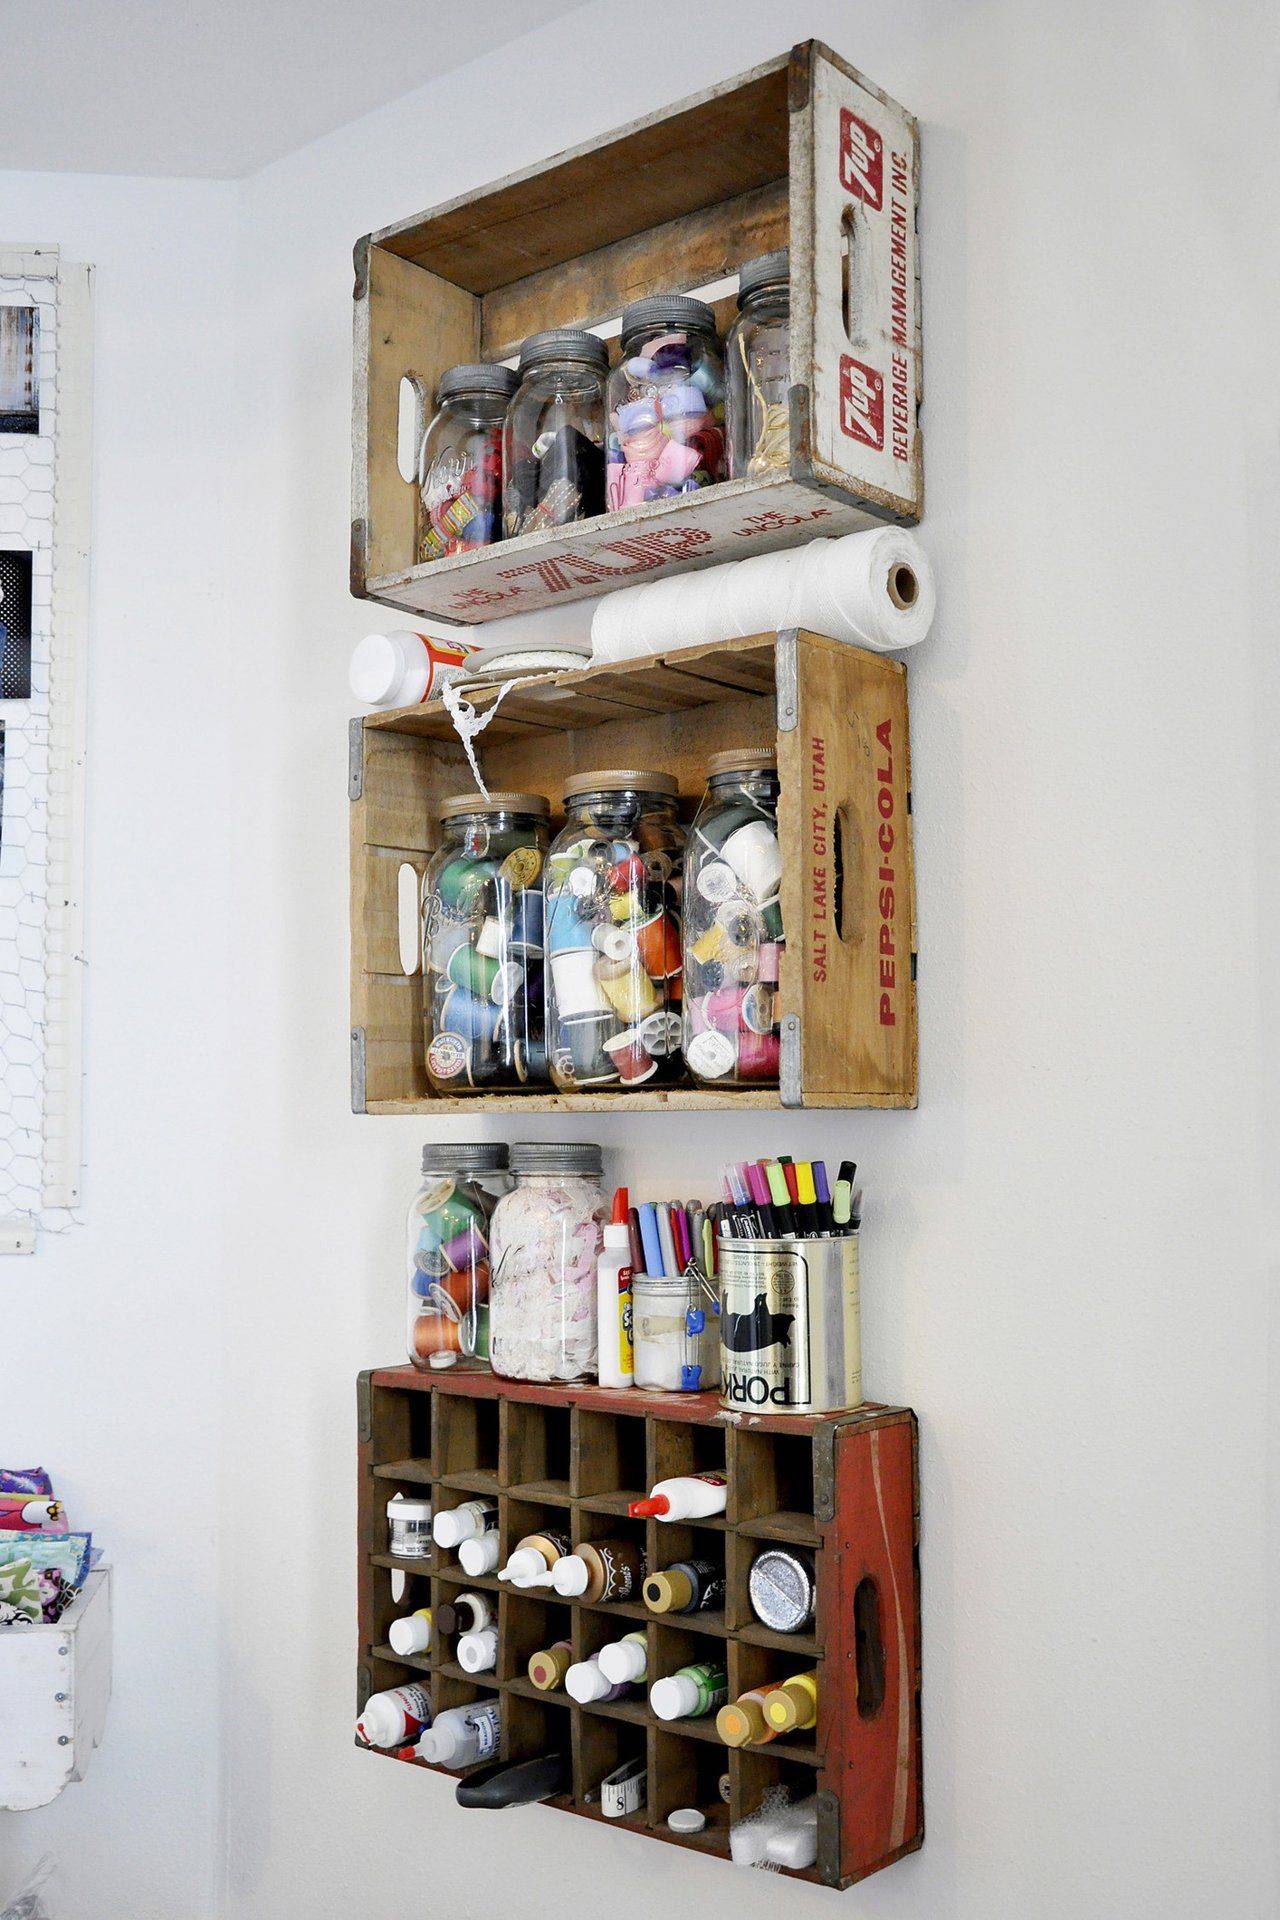 Clever Soda Crate Spice Rack